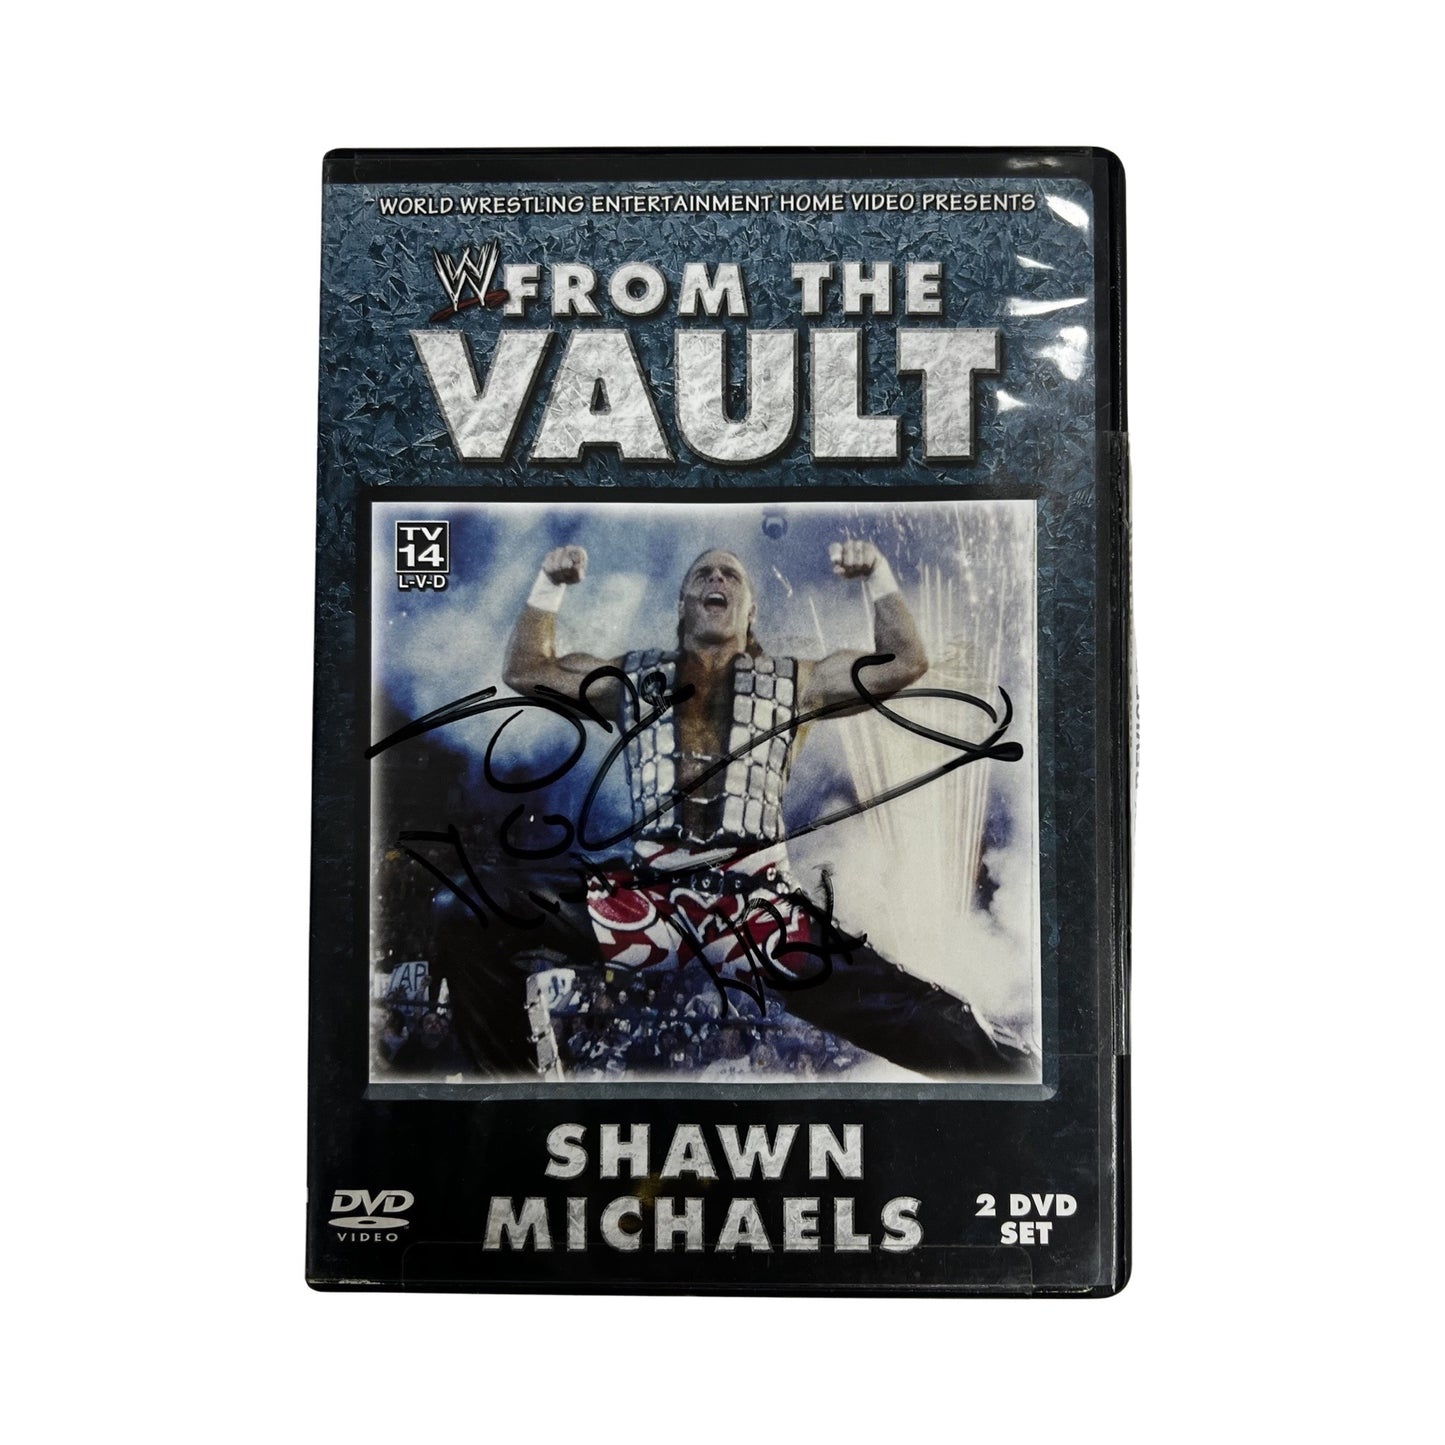 Shawn Michaels Autographed WWE From the Vault DVD JSA